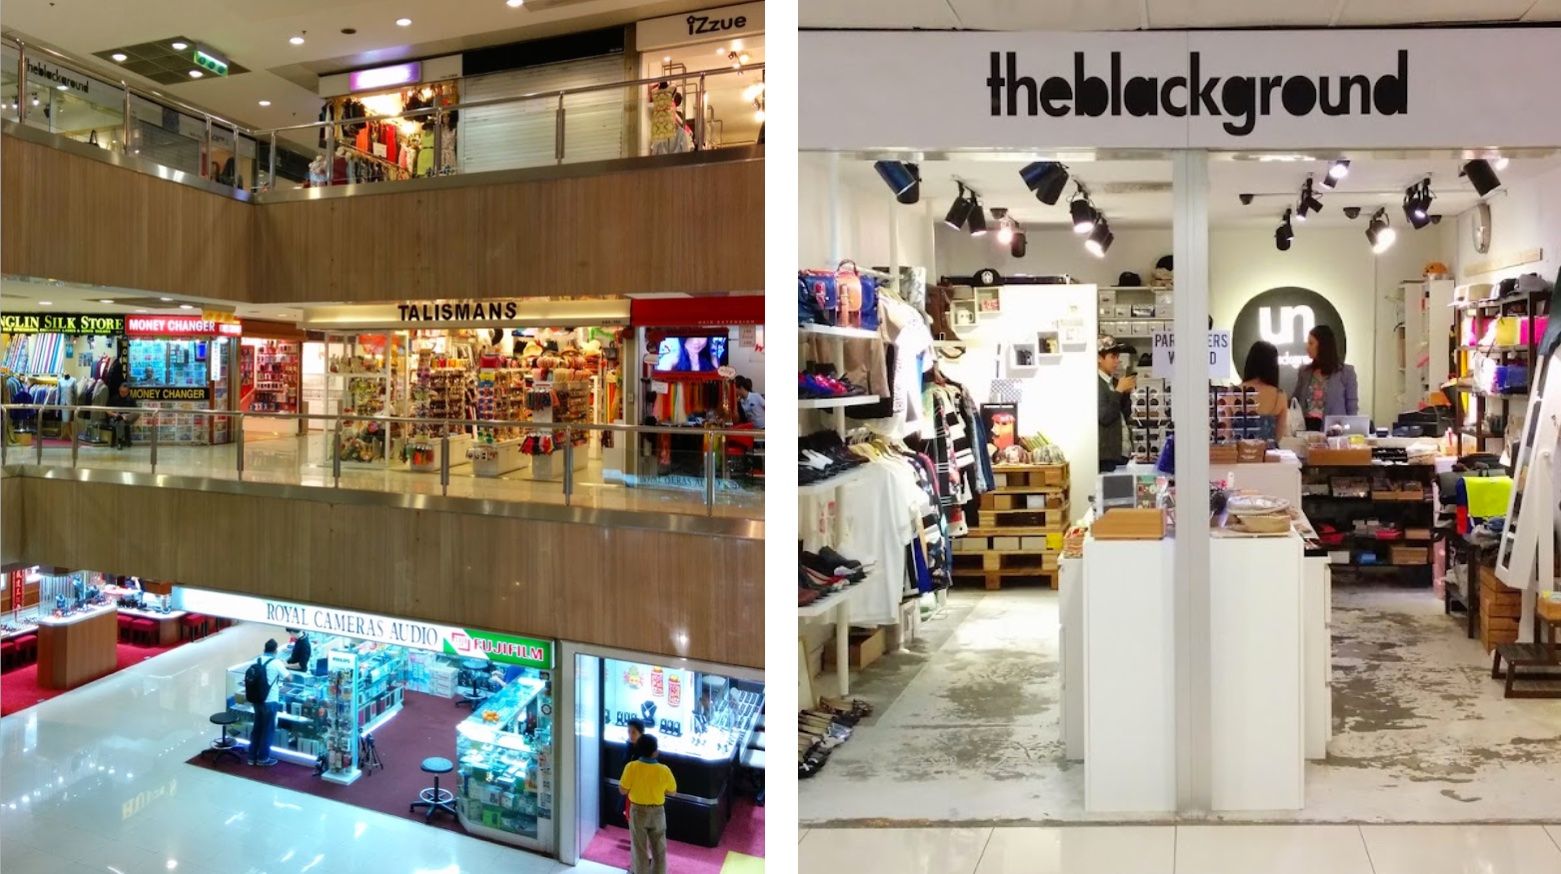 The warrens of messy, crummy, small-footprint retail shops inside Far East Plaza; a low-budget select shop experiment in the building. Both from 2015.